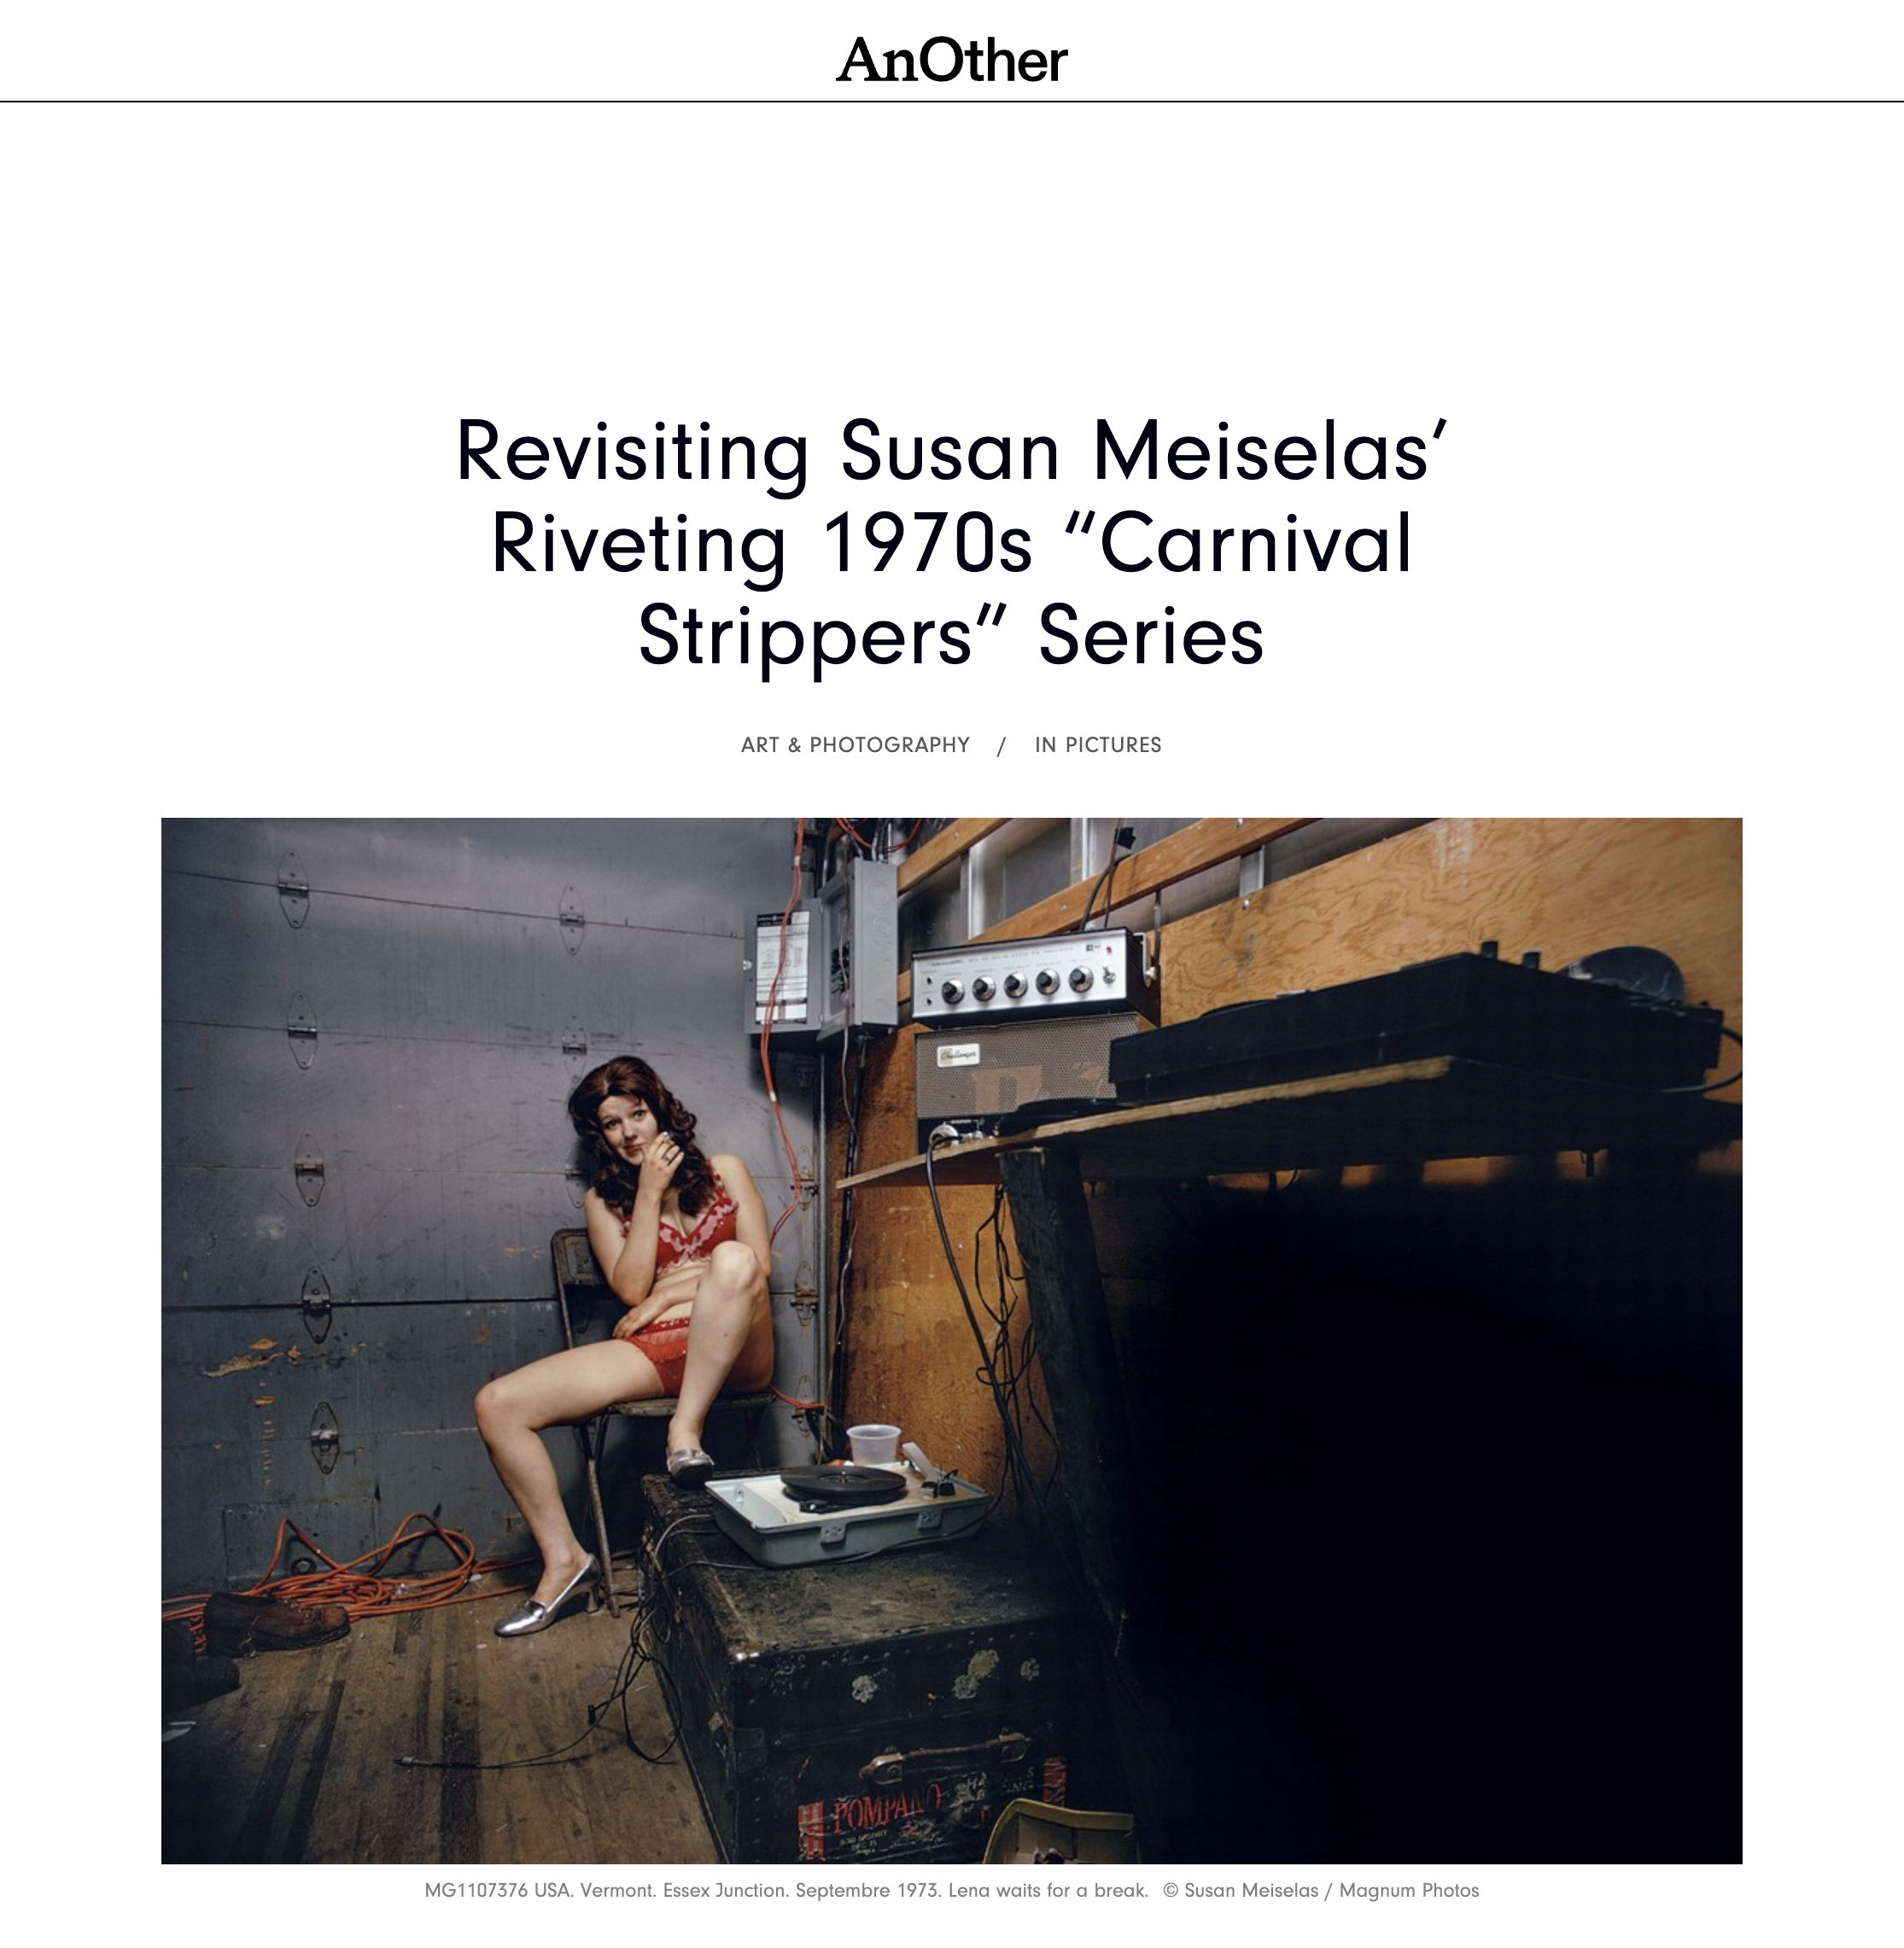 AnOther Magazine: Revisiting Susan Meiselas’ Riveting 1970s “Carnival Strippers” Series